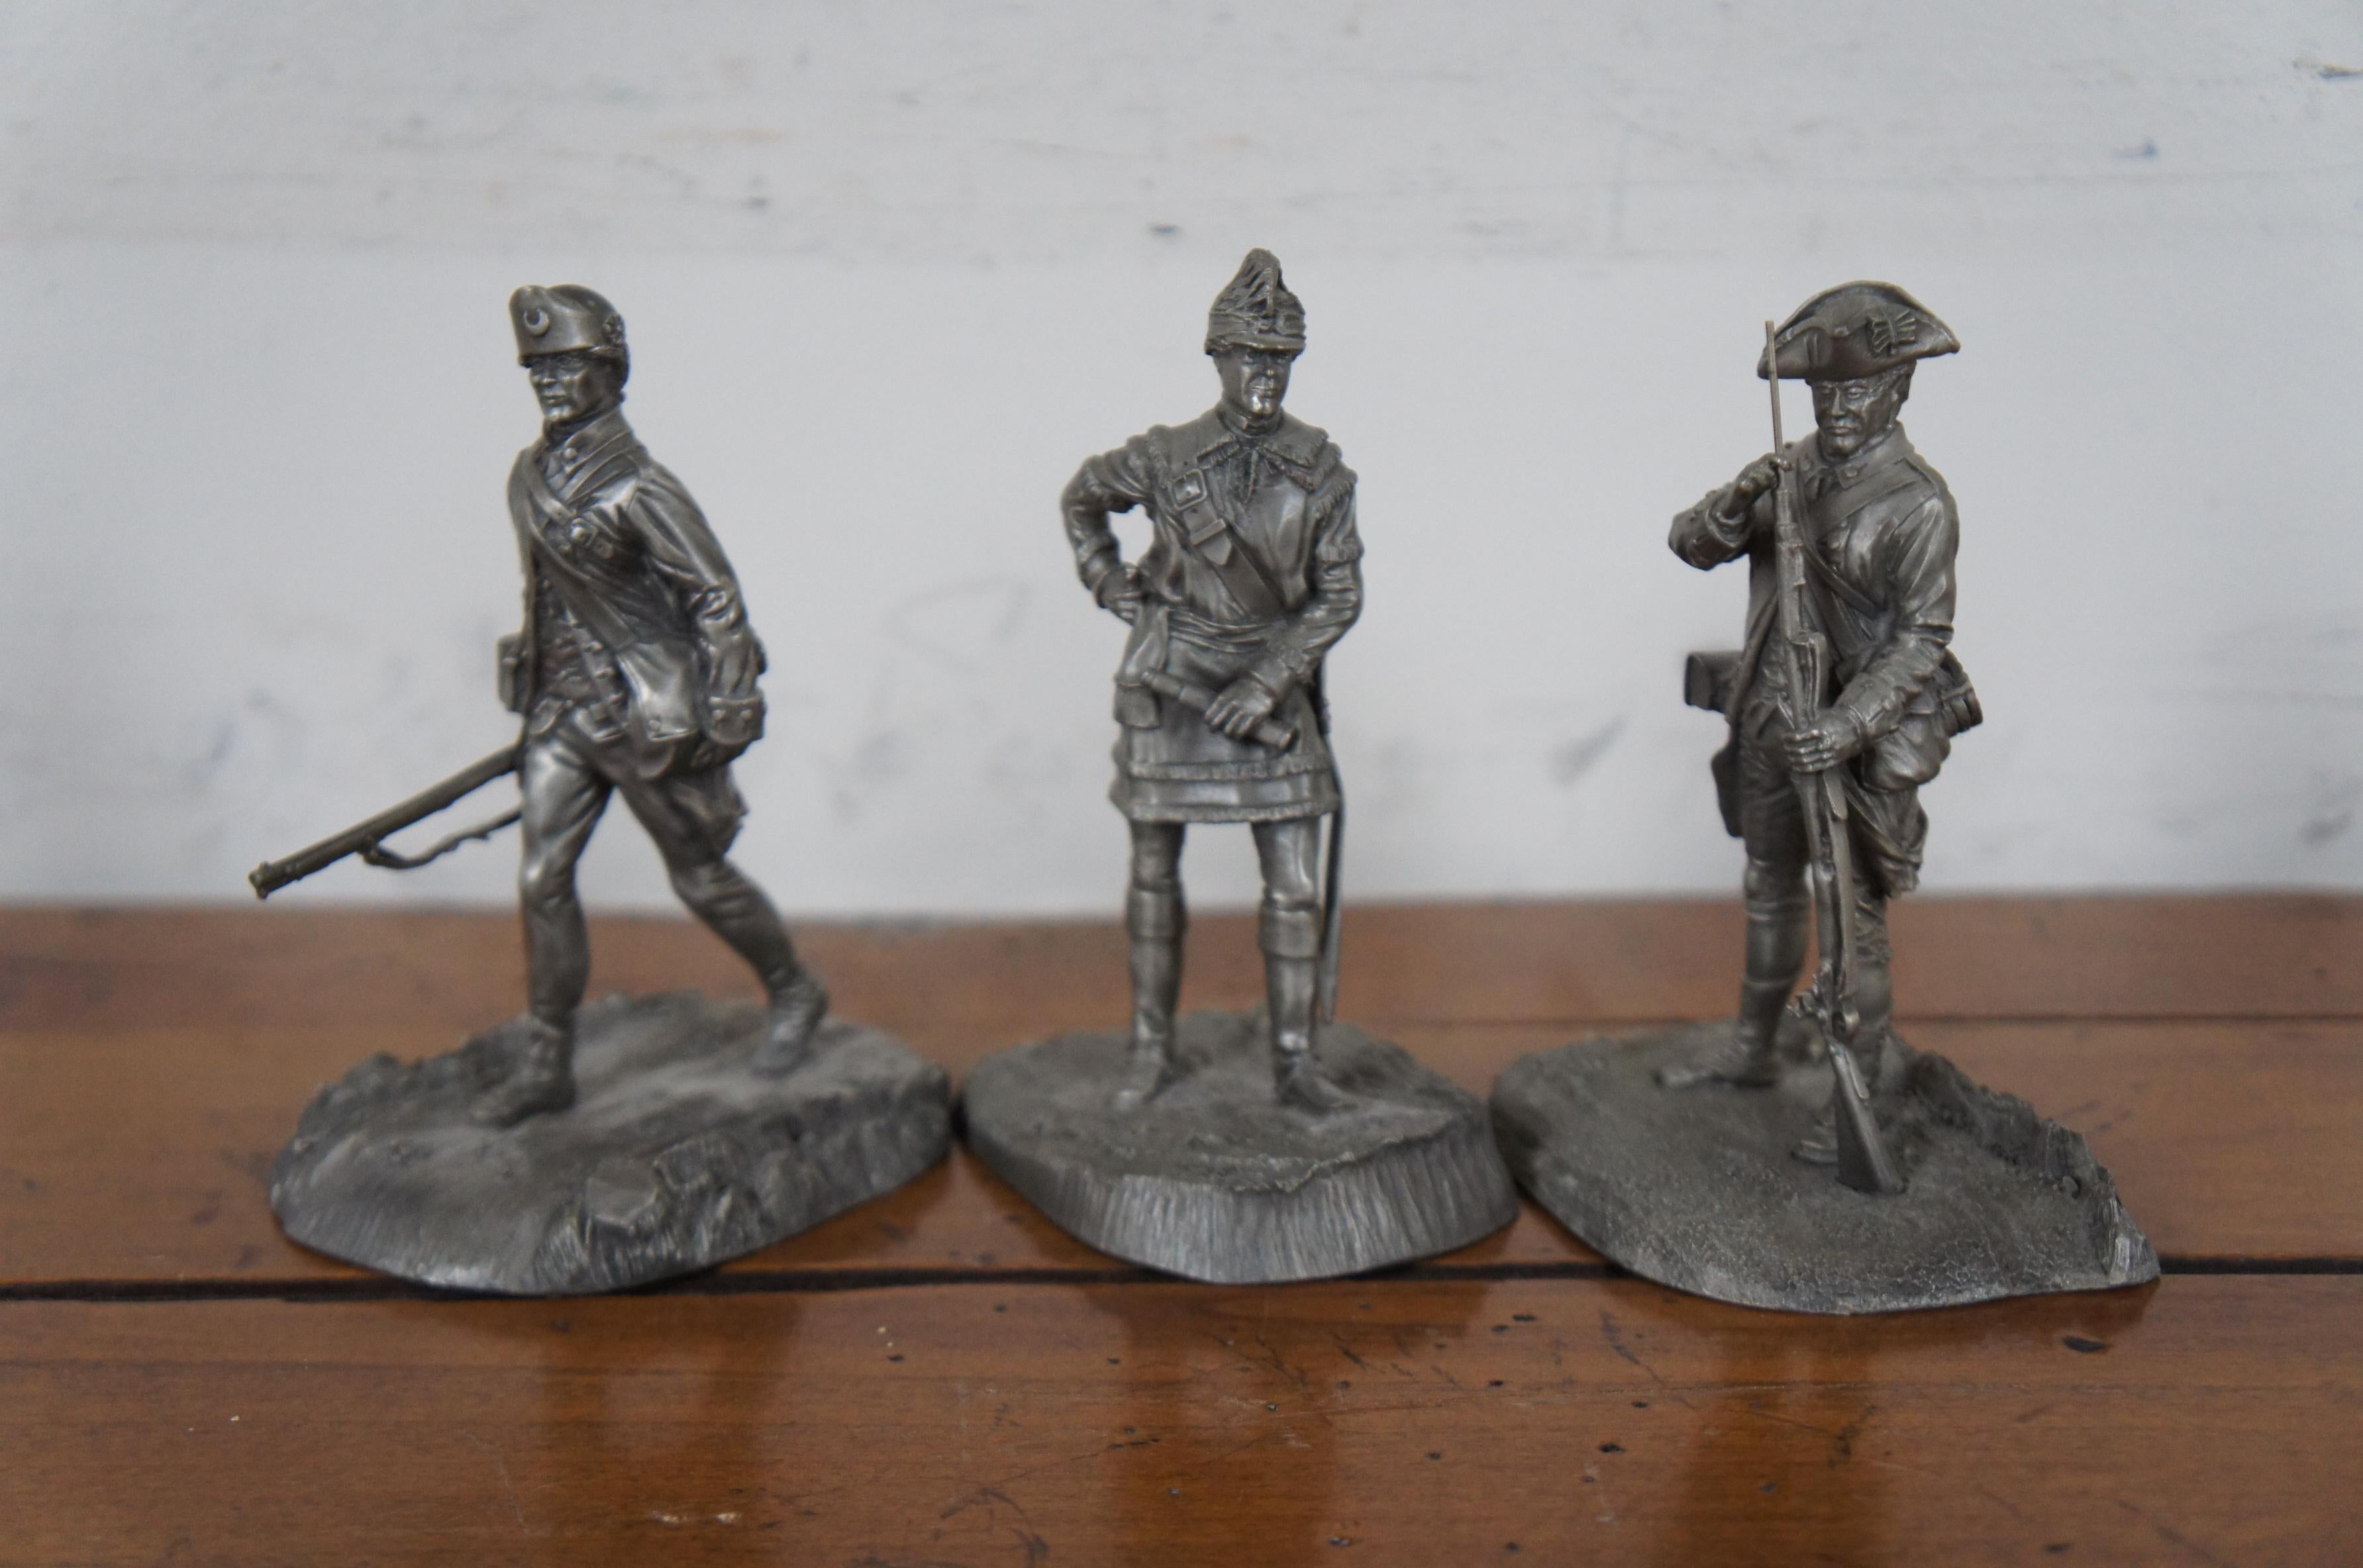 American Colonial 12 Franklin Mint 1970s Pewter Revolutionary War Soldier Officer Figurines